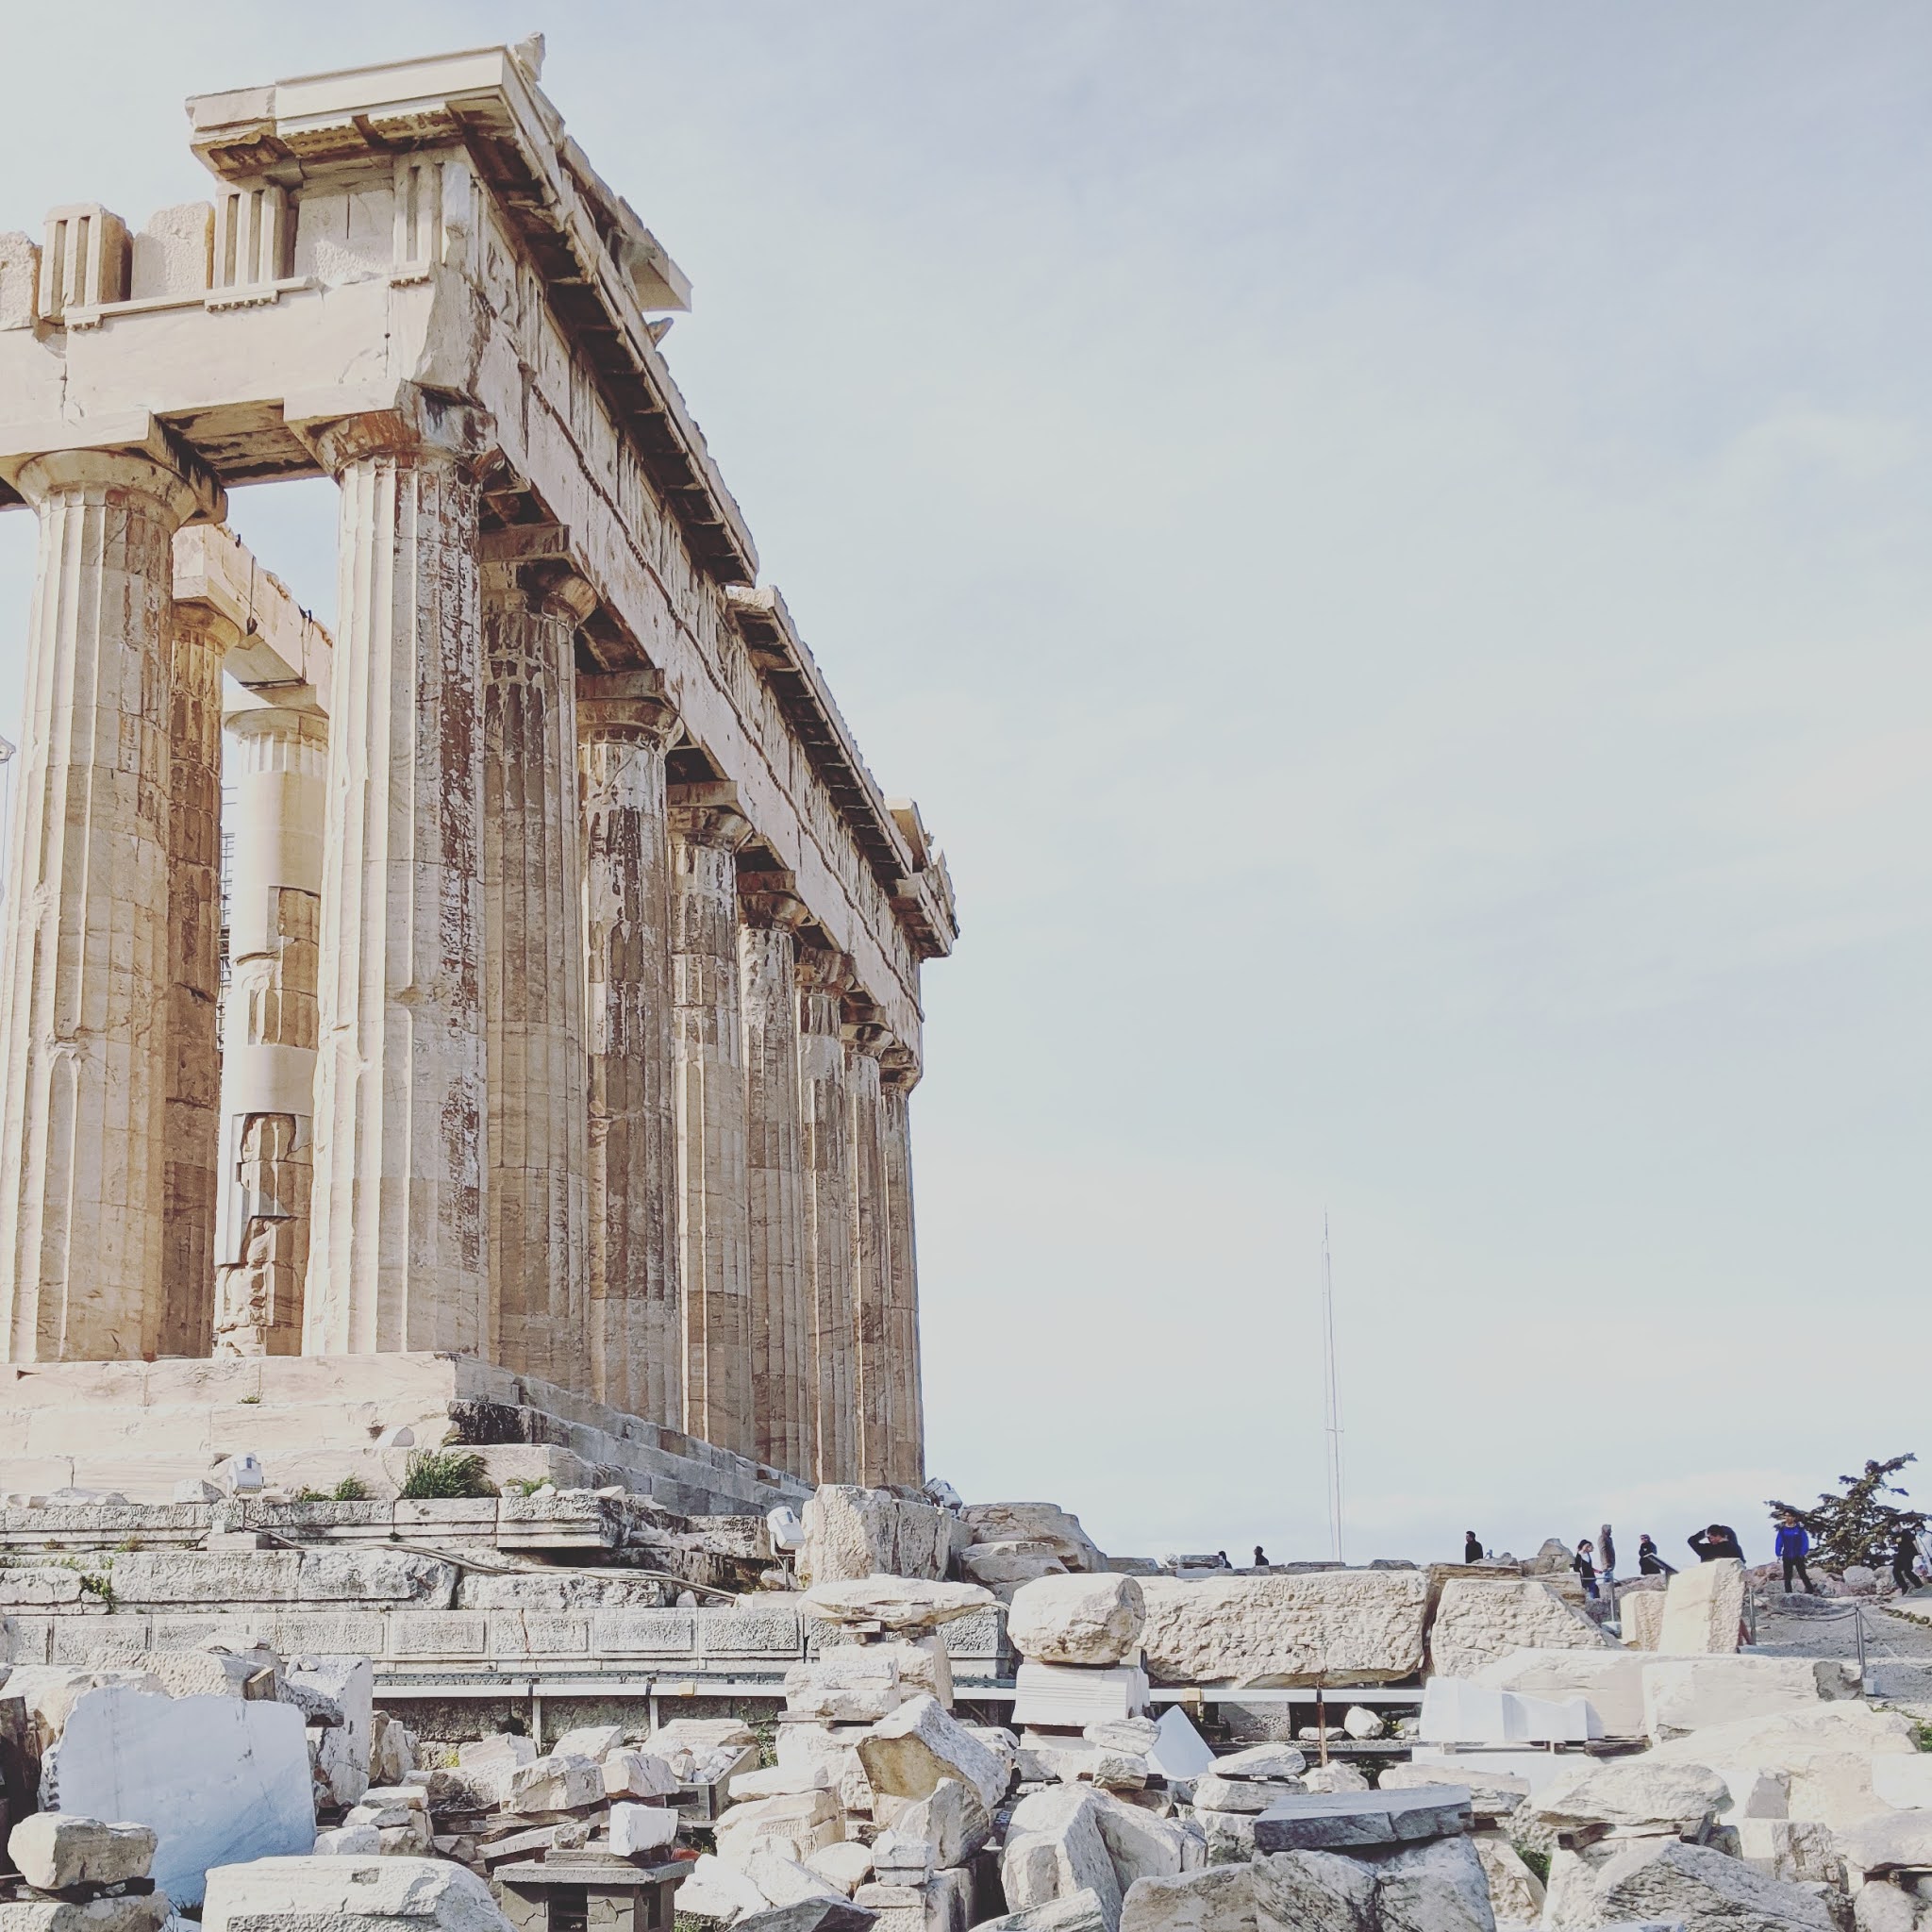 the Parthenon against a hazy sky, the ancient structure is one of the best things to see during a weekend in athens, greece